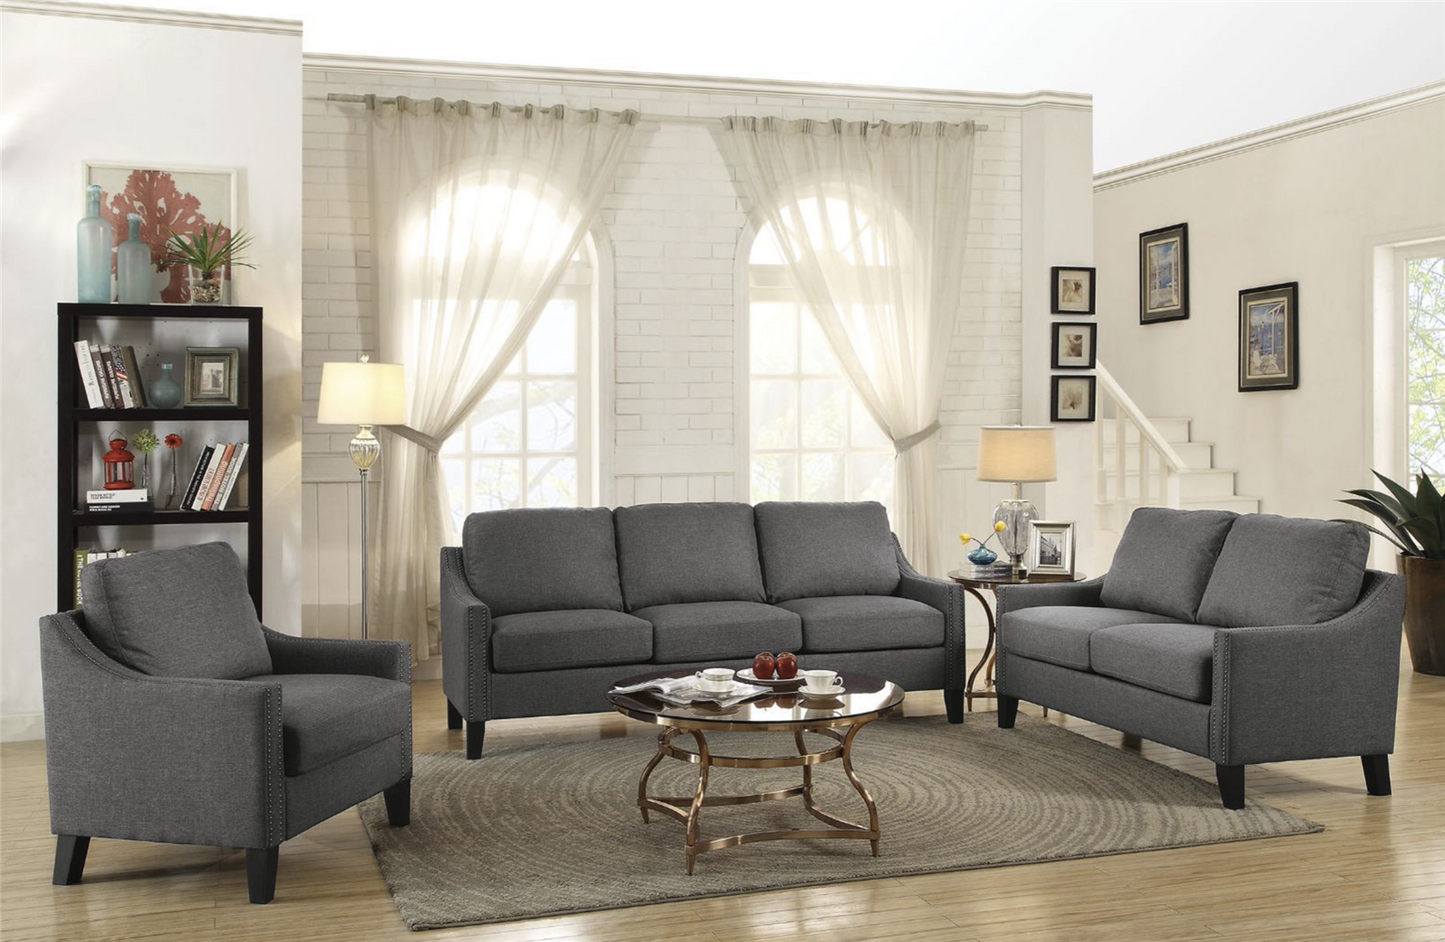 Zapata Transitional Upholstered Sofa in Gray- Acme Furniture